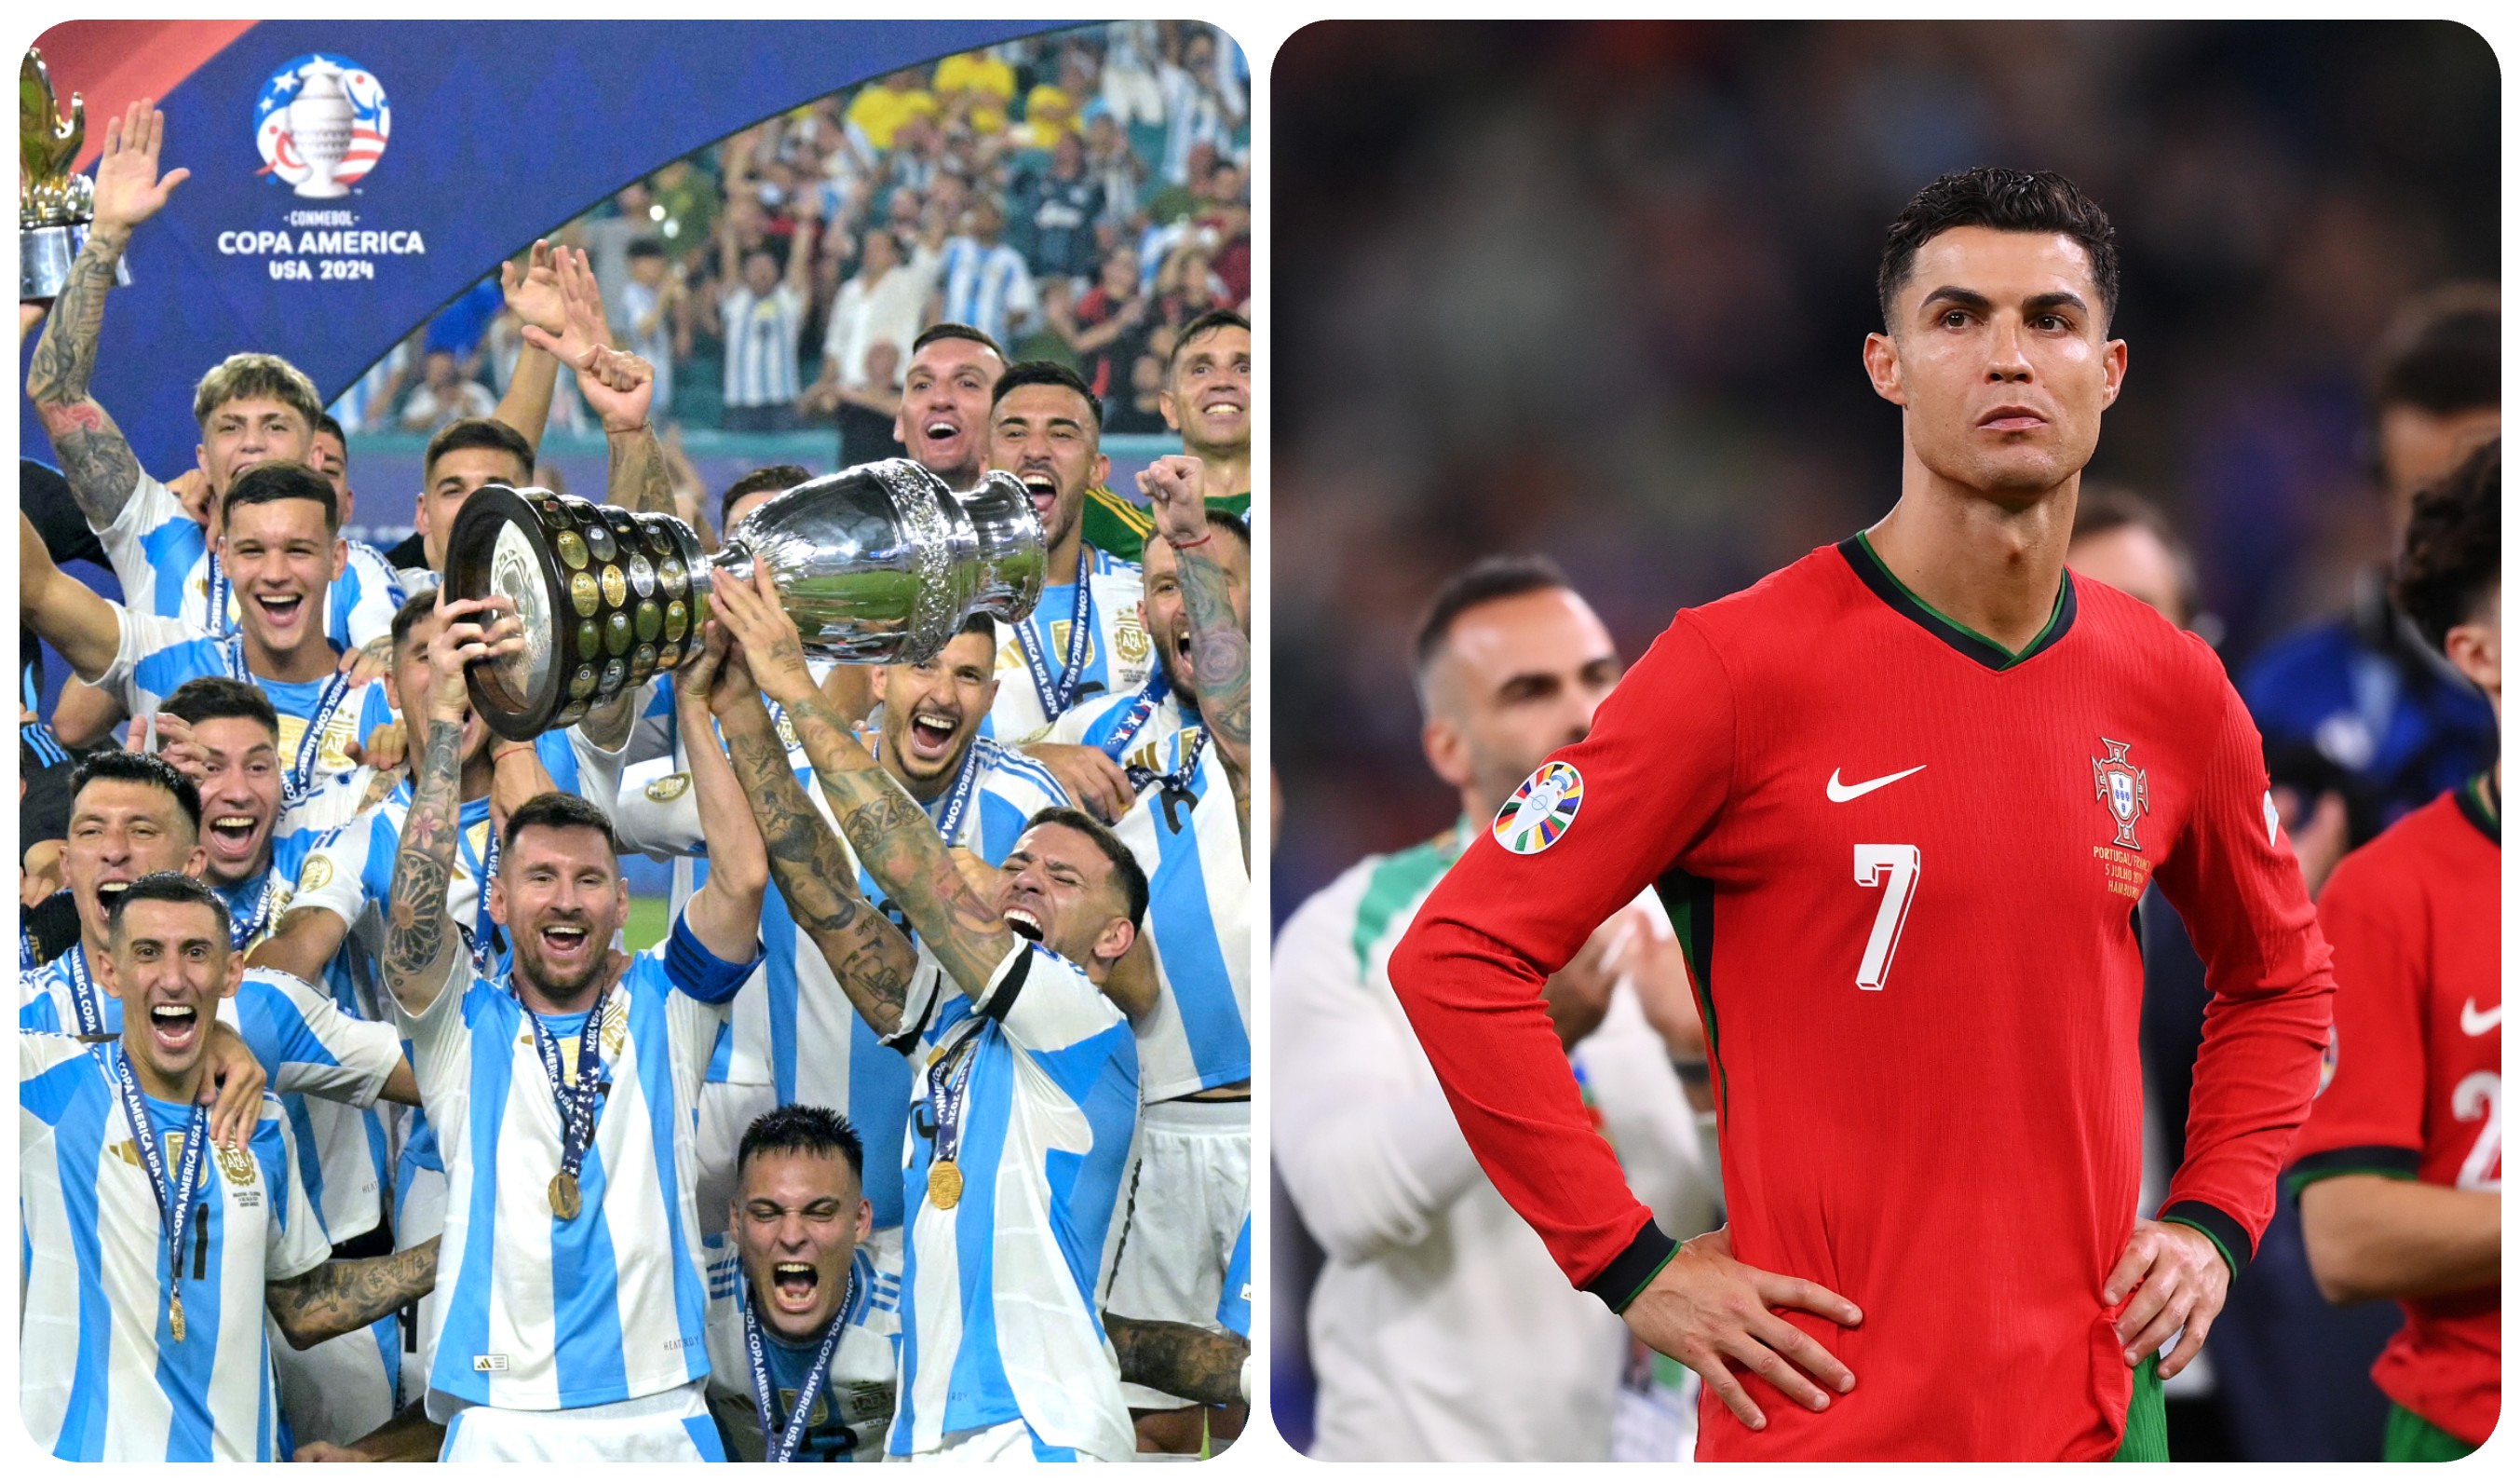 As Cristiano Ronaldo’s career nosedives, Lionel Messi becomes true GOAT with record-breaking 45th trophy